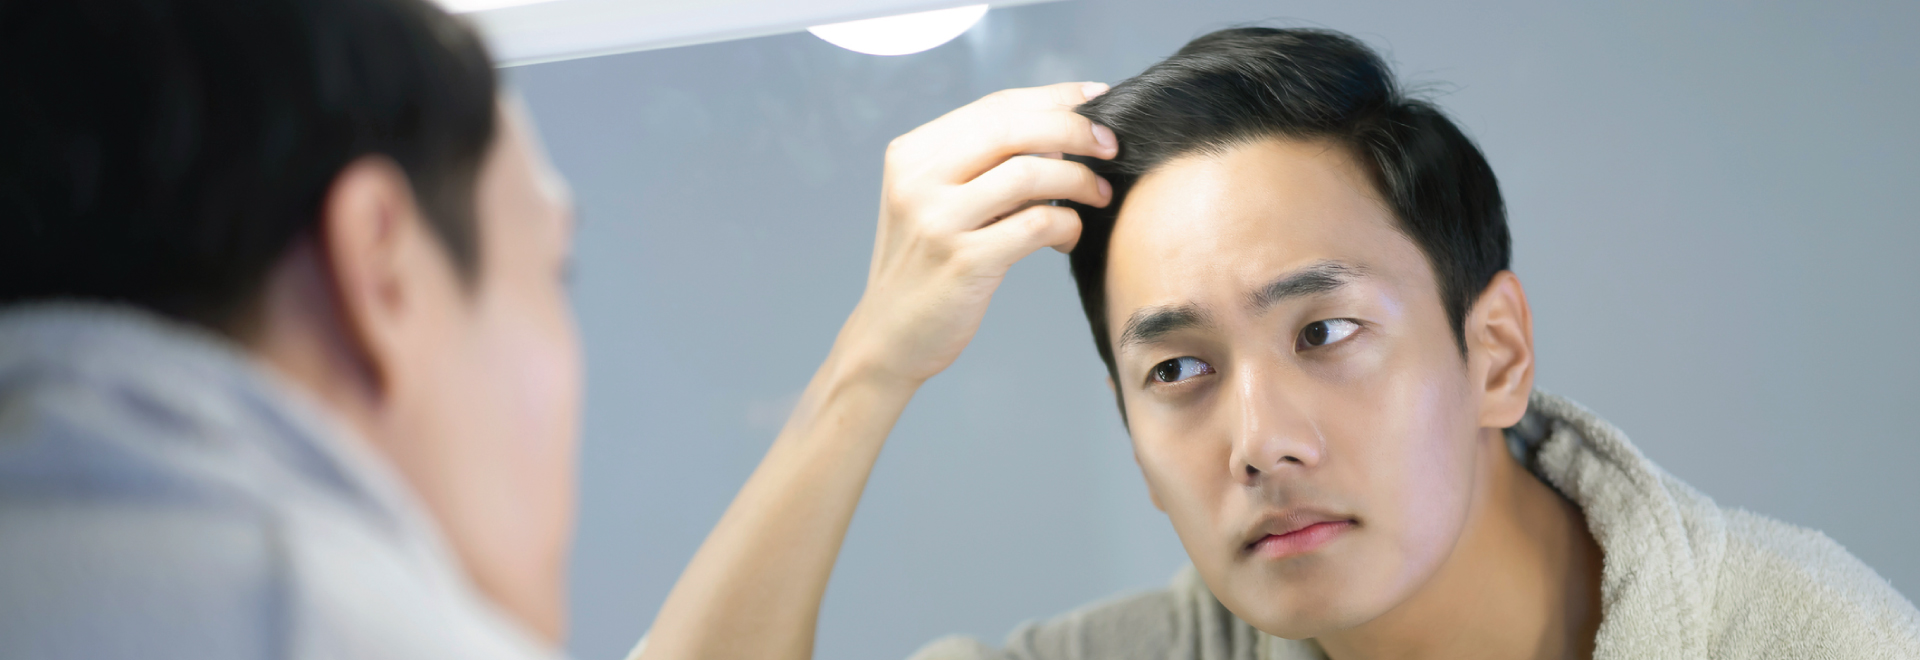 hair-loss-causes-symptoms-treatment-chinese-medicine